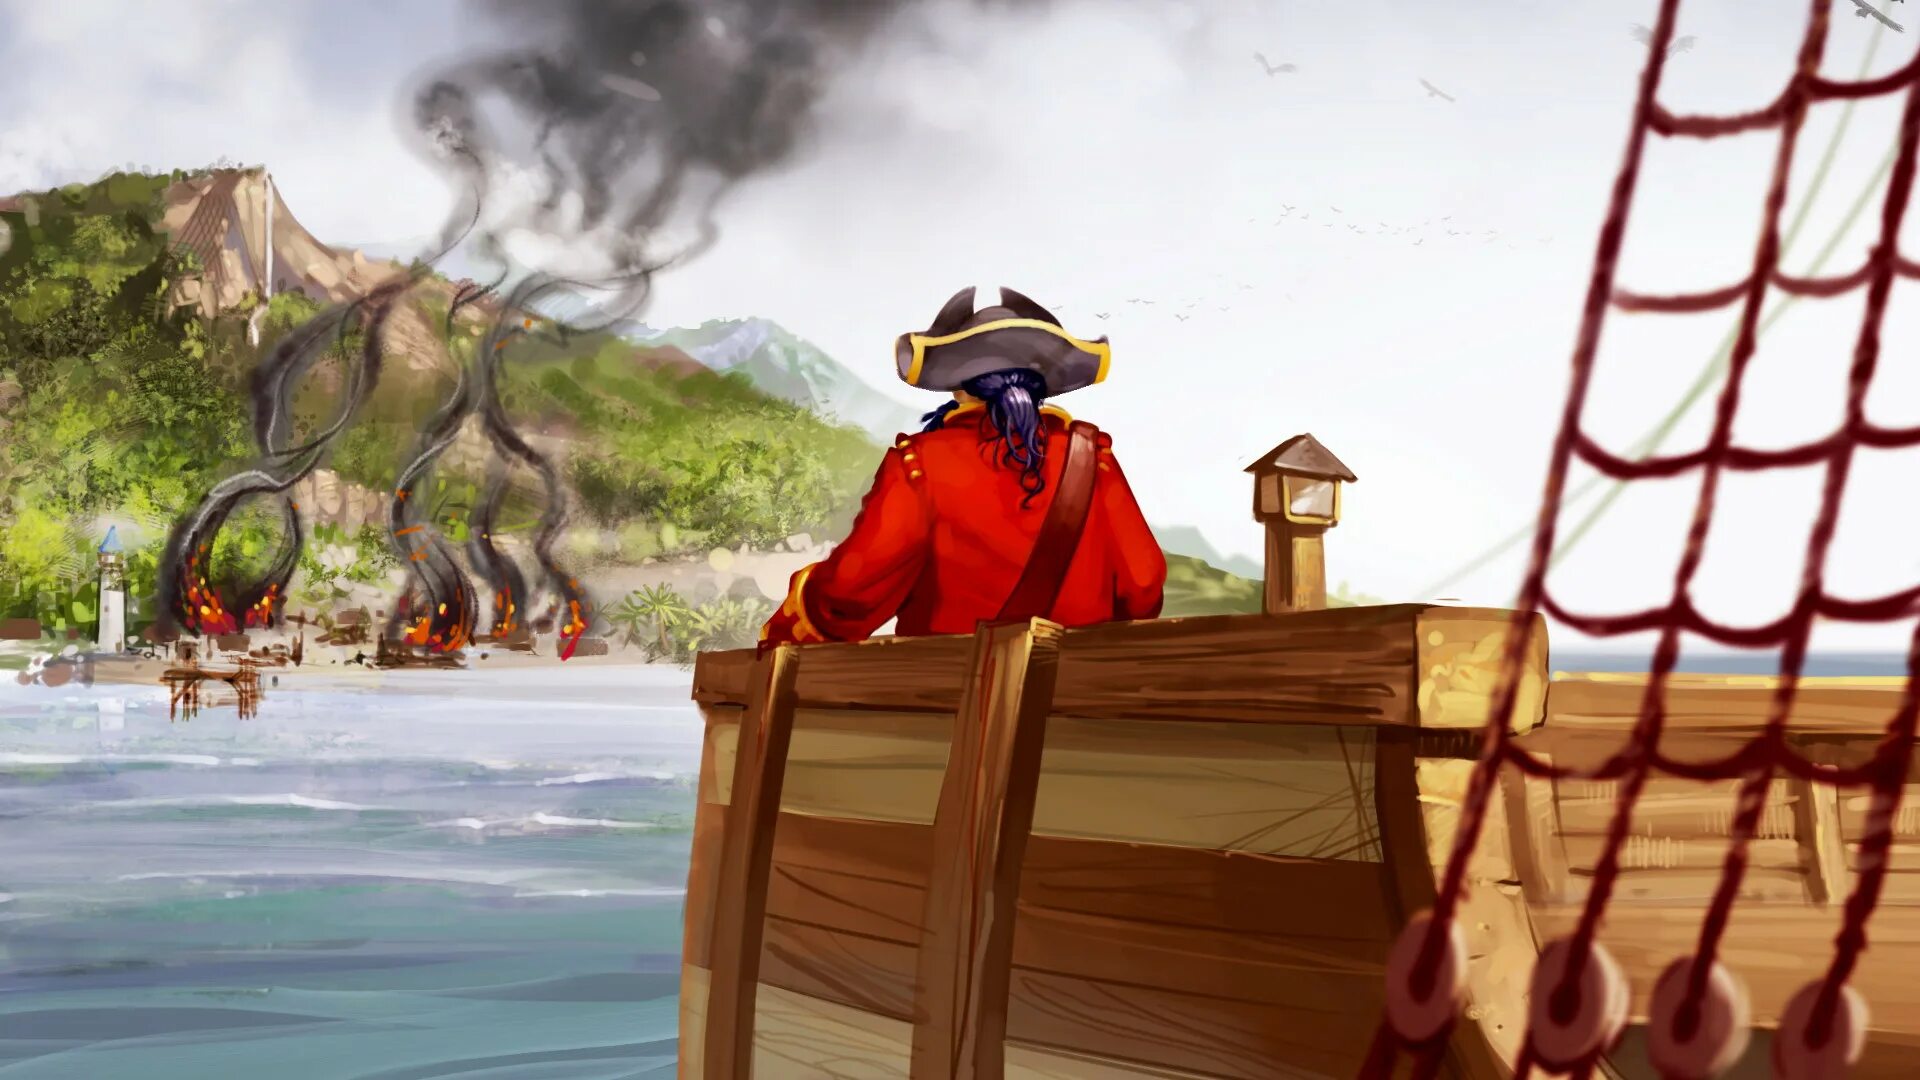 Journey of discovery. Anno 1701 Dawn of Discovery. Пираты в anno. Anno 1701 пираты. Пираты, вулкан.